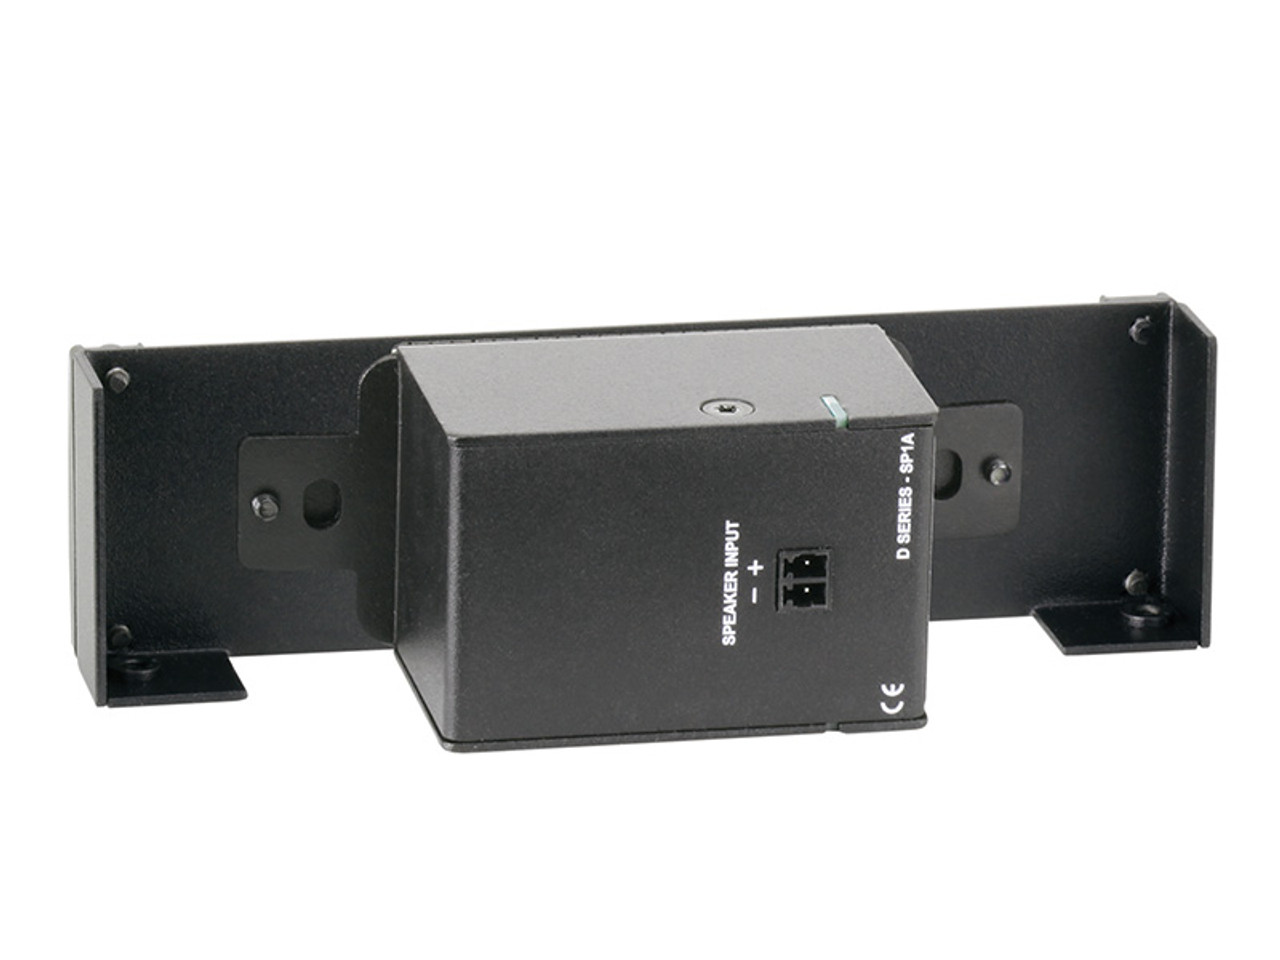 RDL RU-D1 RACK-UP Adapter Mount for Decora D-Series Products (RU-D1)